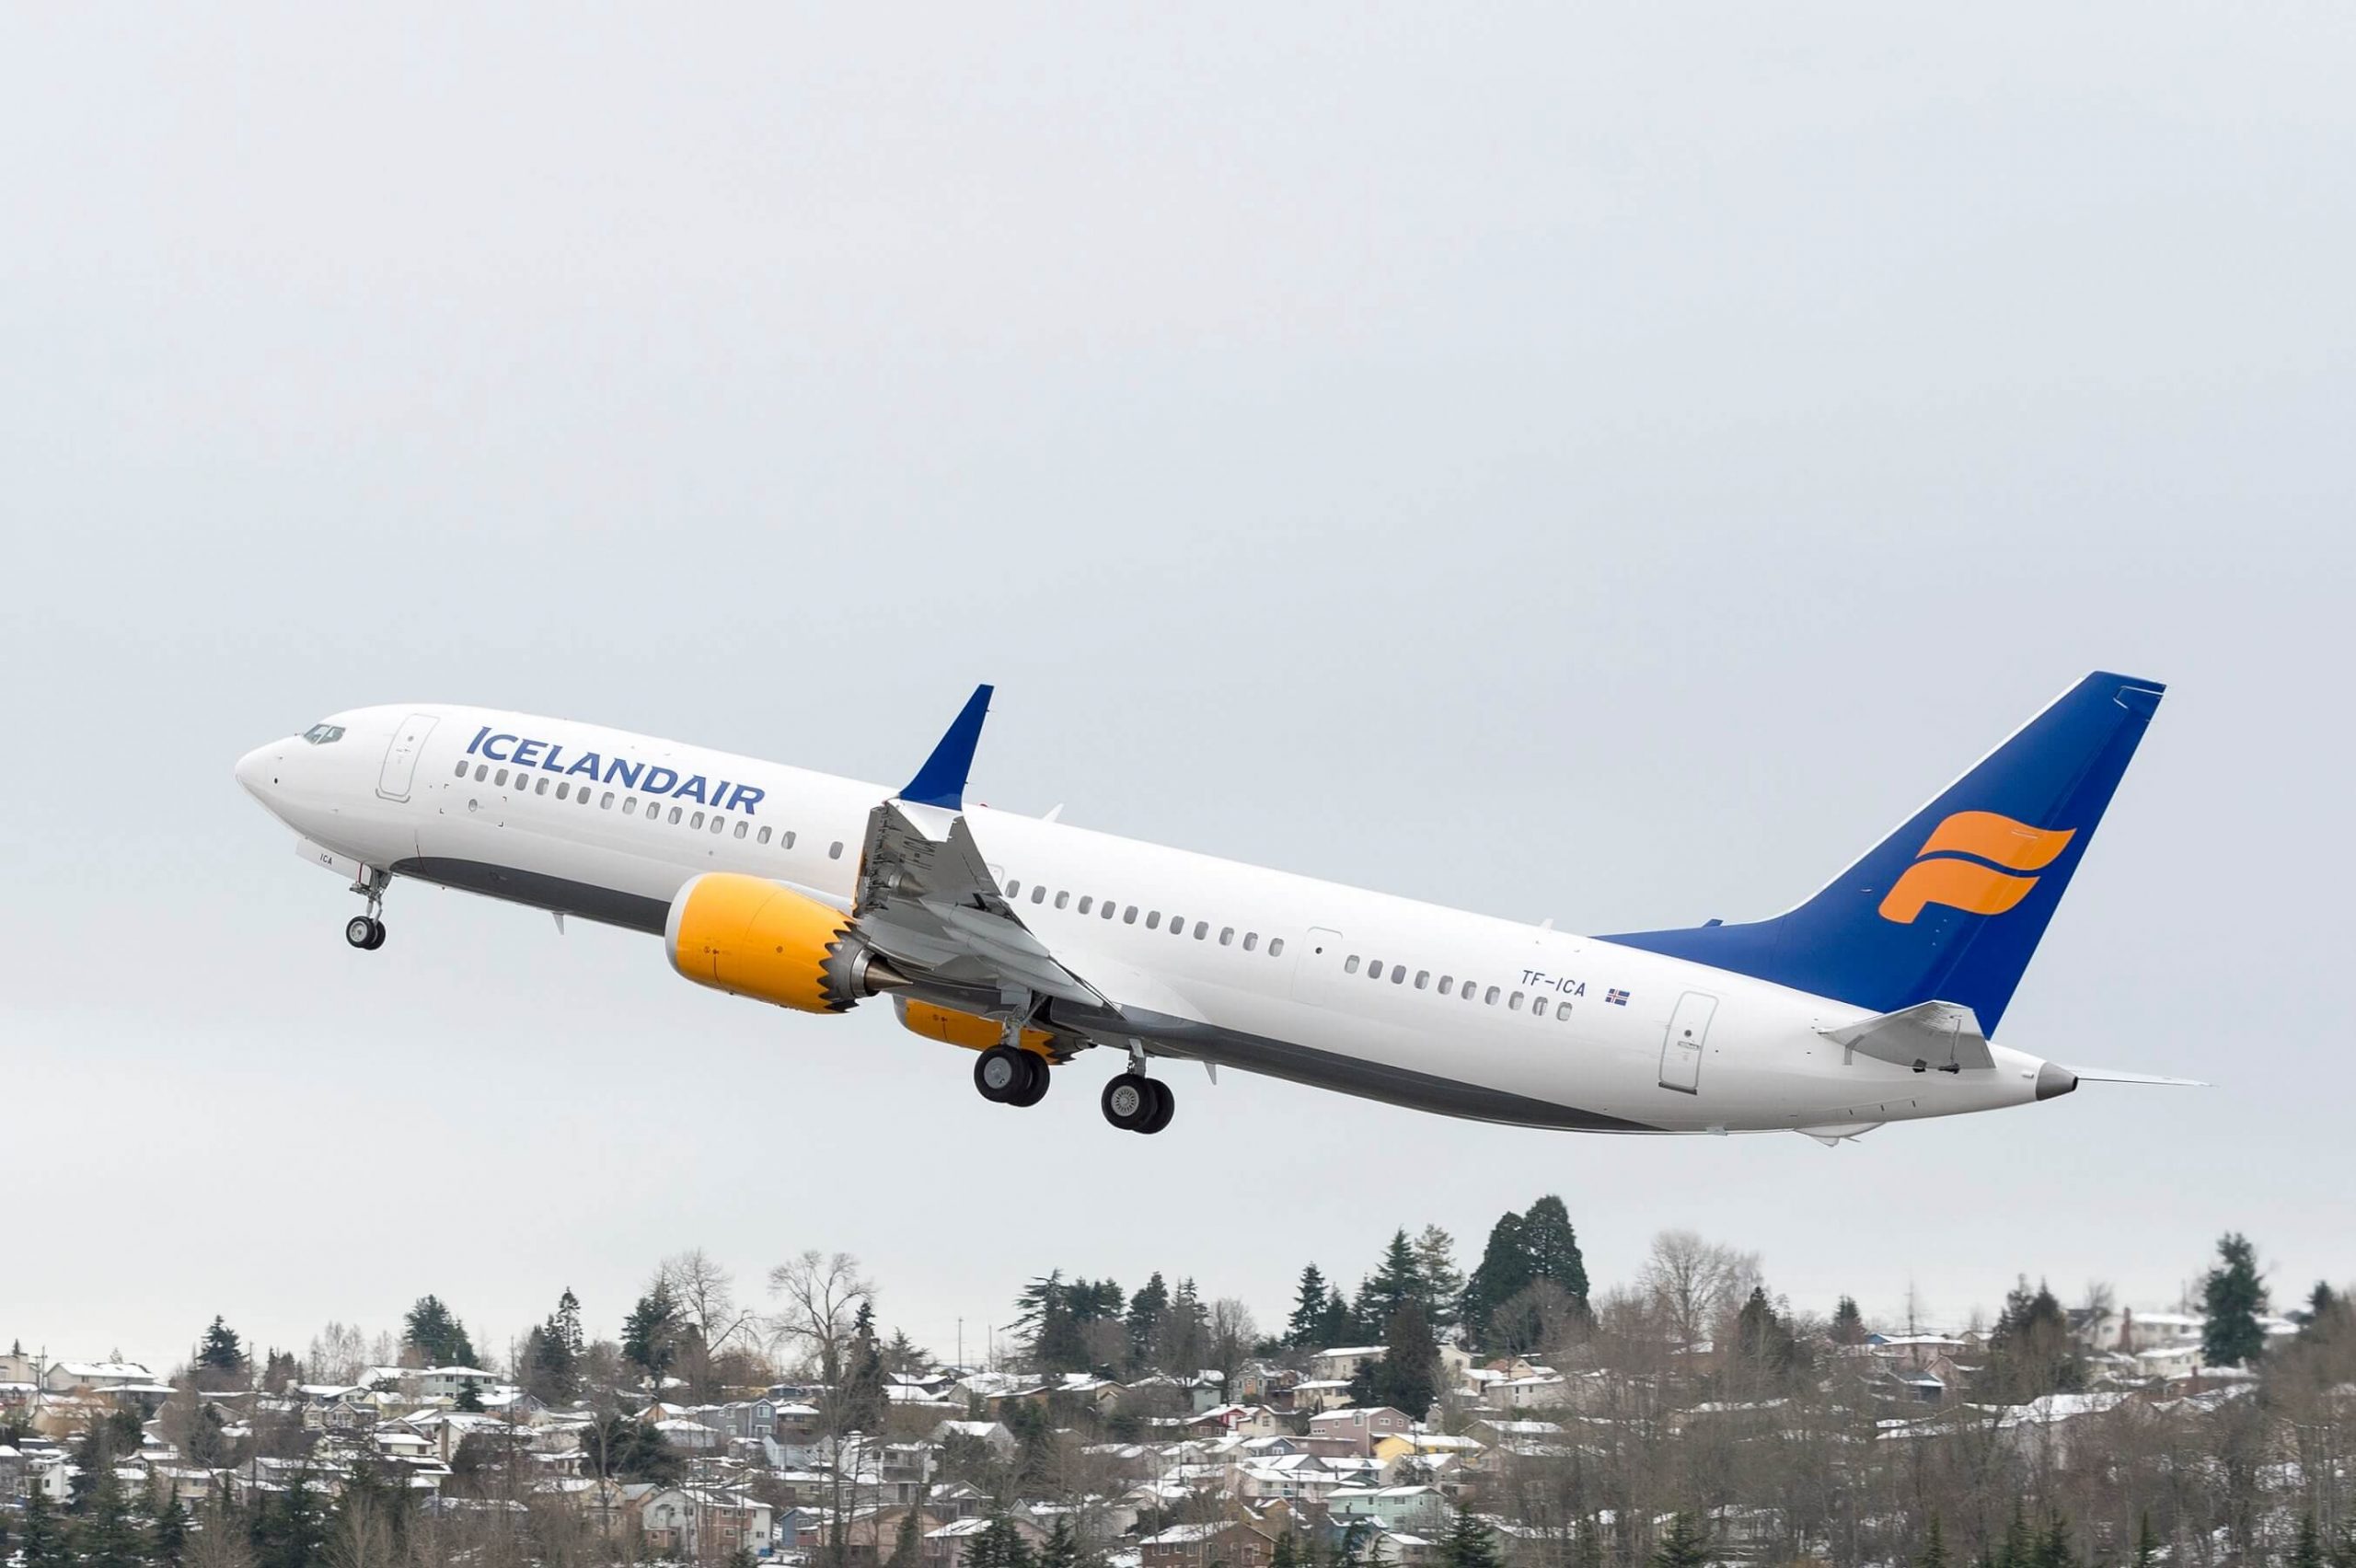 Icelandair introduces new route connecting Keflavik International Airport to Faroe Islands